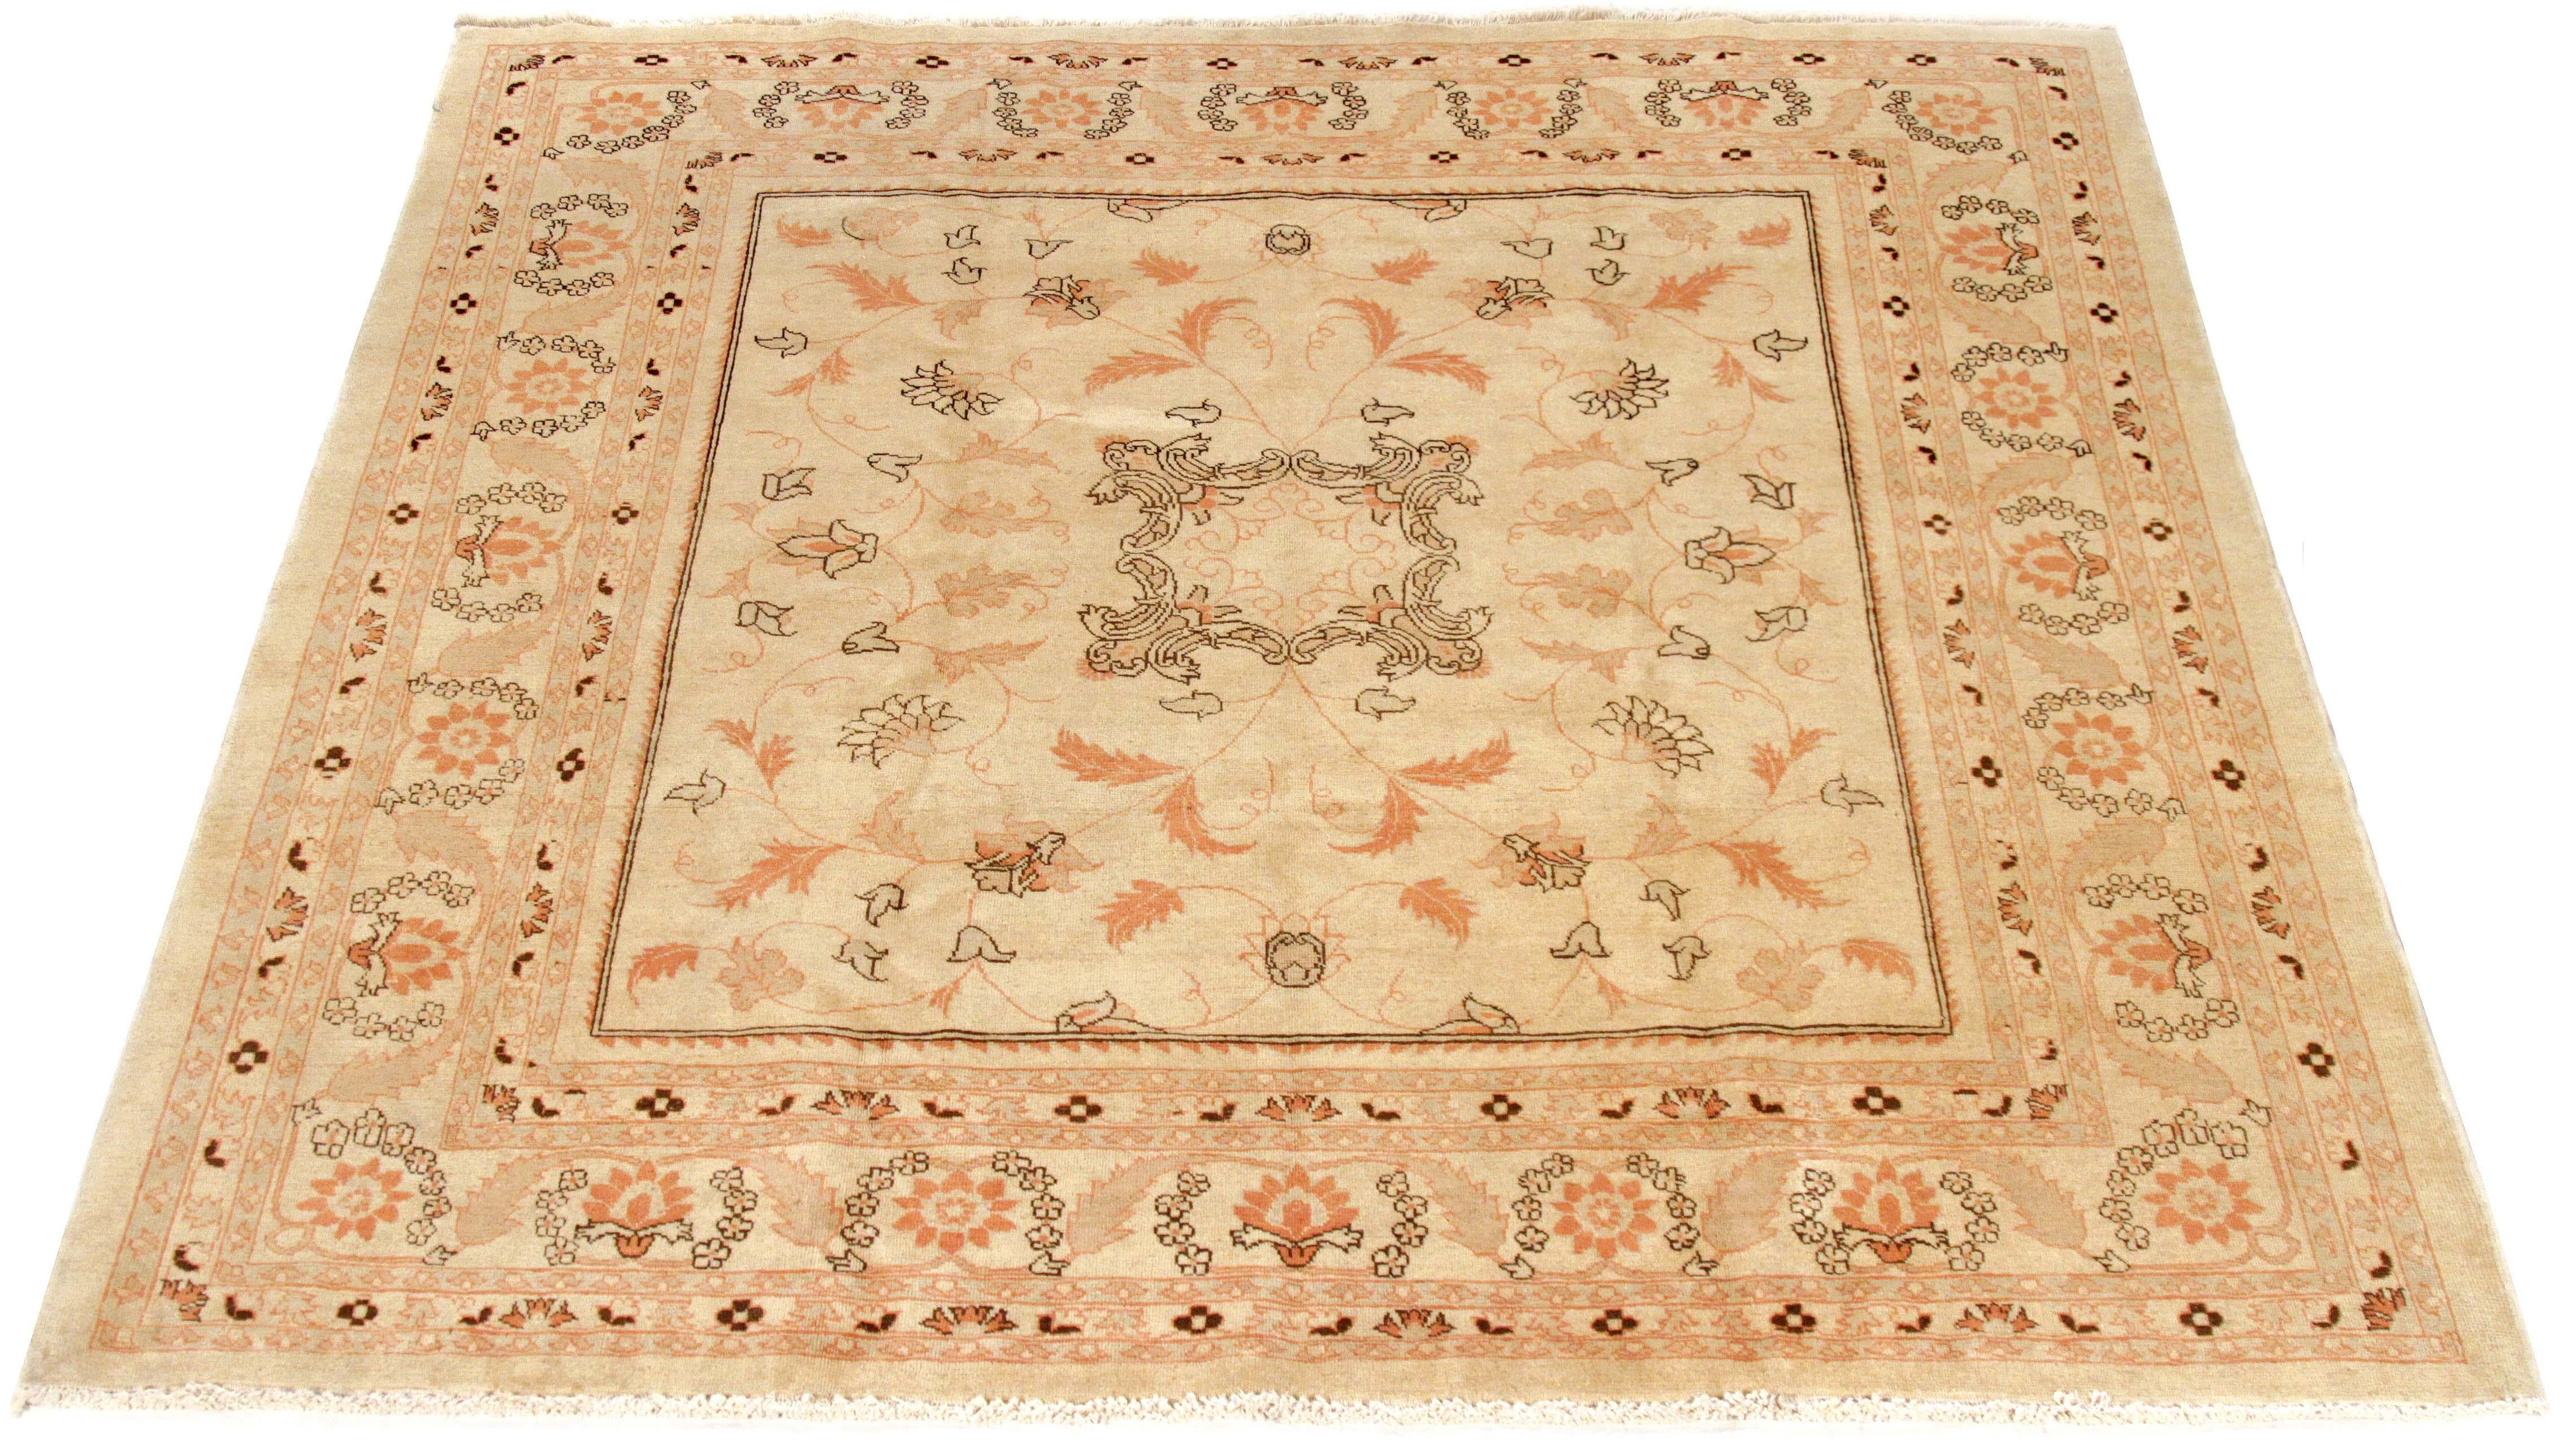 Antique Persian rug handwoven from the finest sheep’s wool and colored with all-natural vegetable dyes that are safe for humans and pets. It’s a traditional Haji Jalili design featuring mixed floral details in brown and black on an ivory field. It